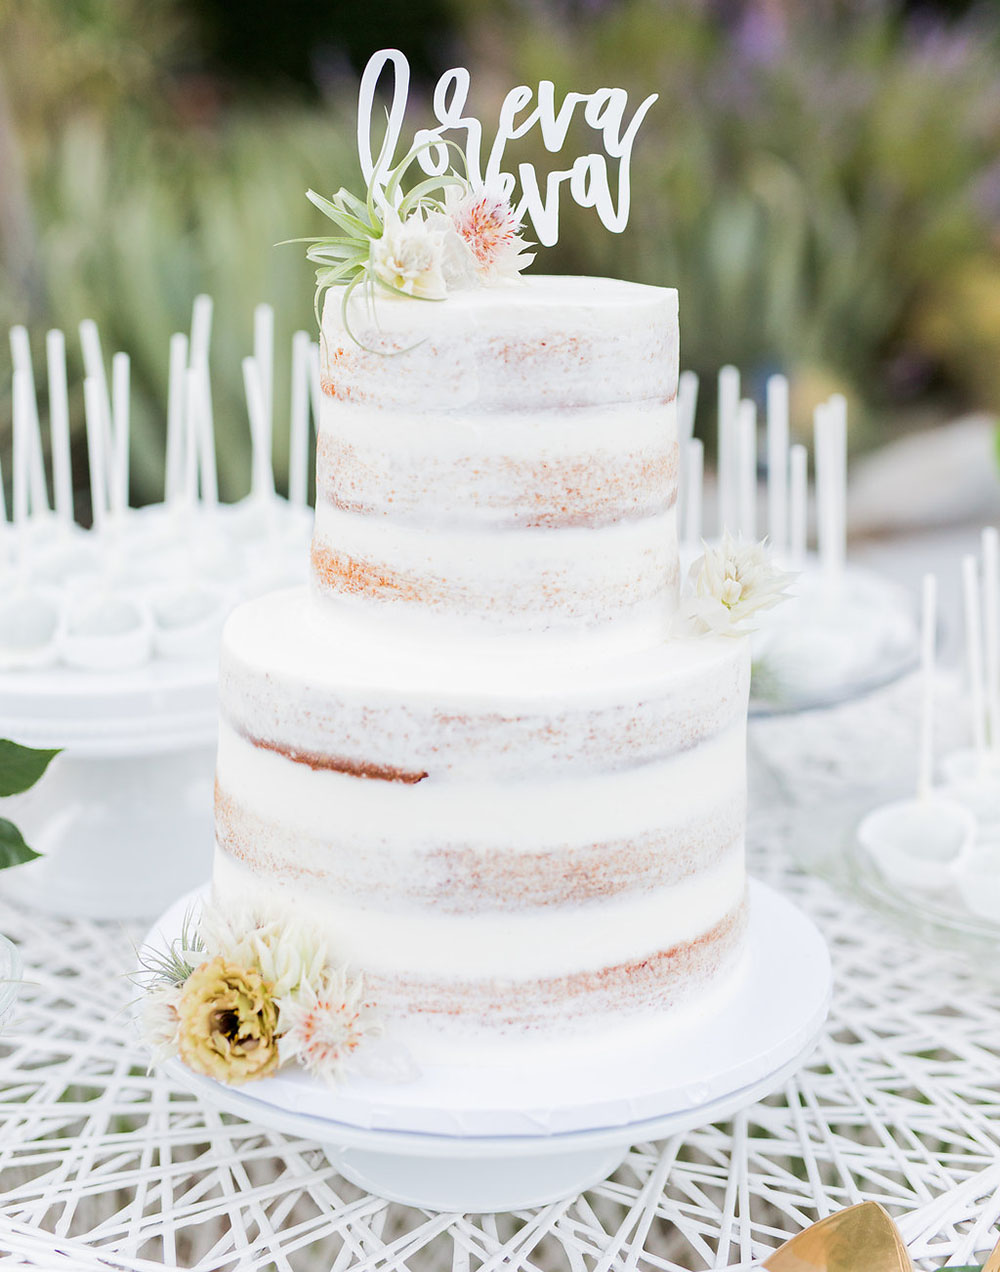 The wedding cake was a naked one with florals and a calligraphy topper